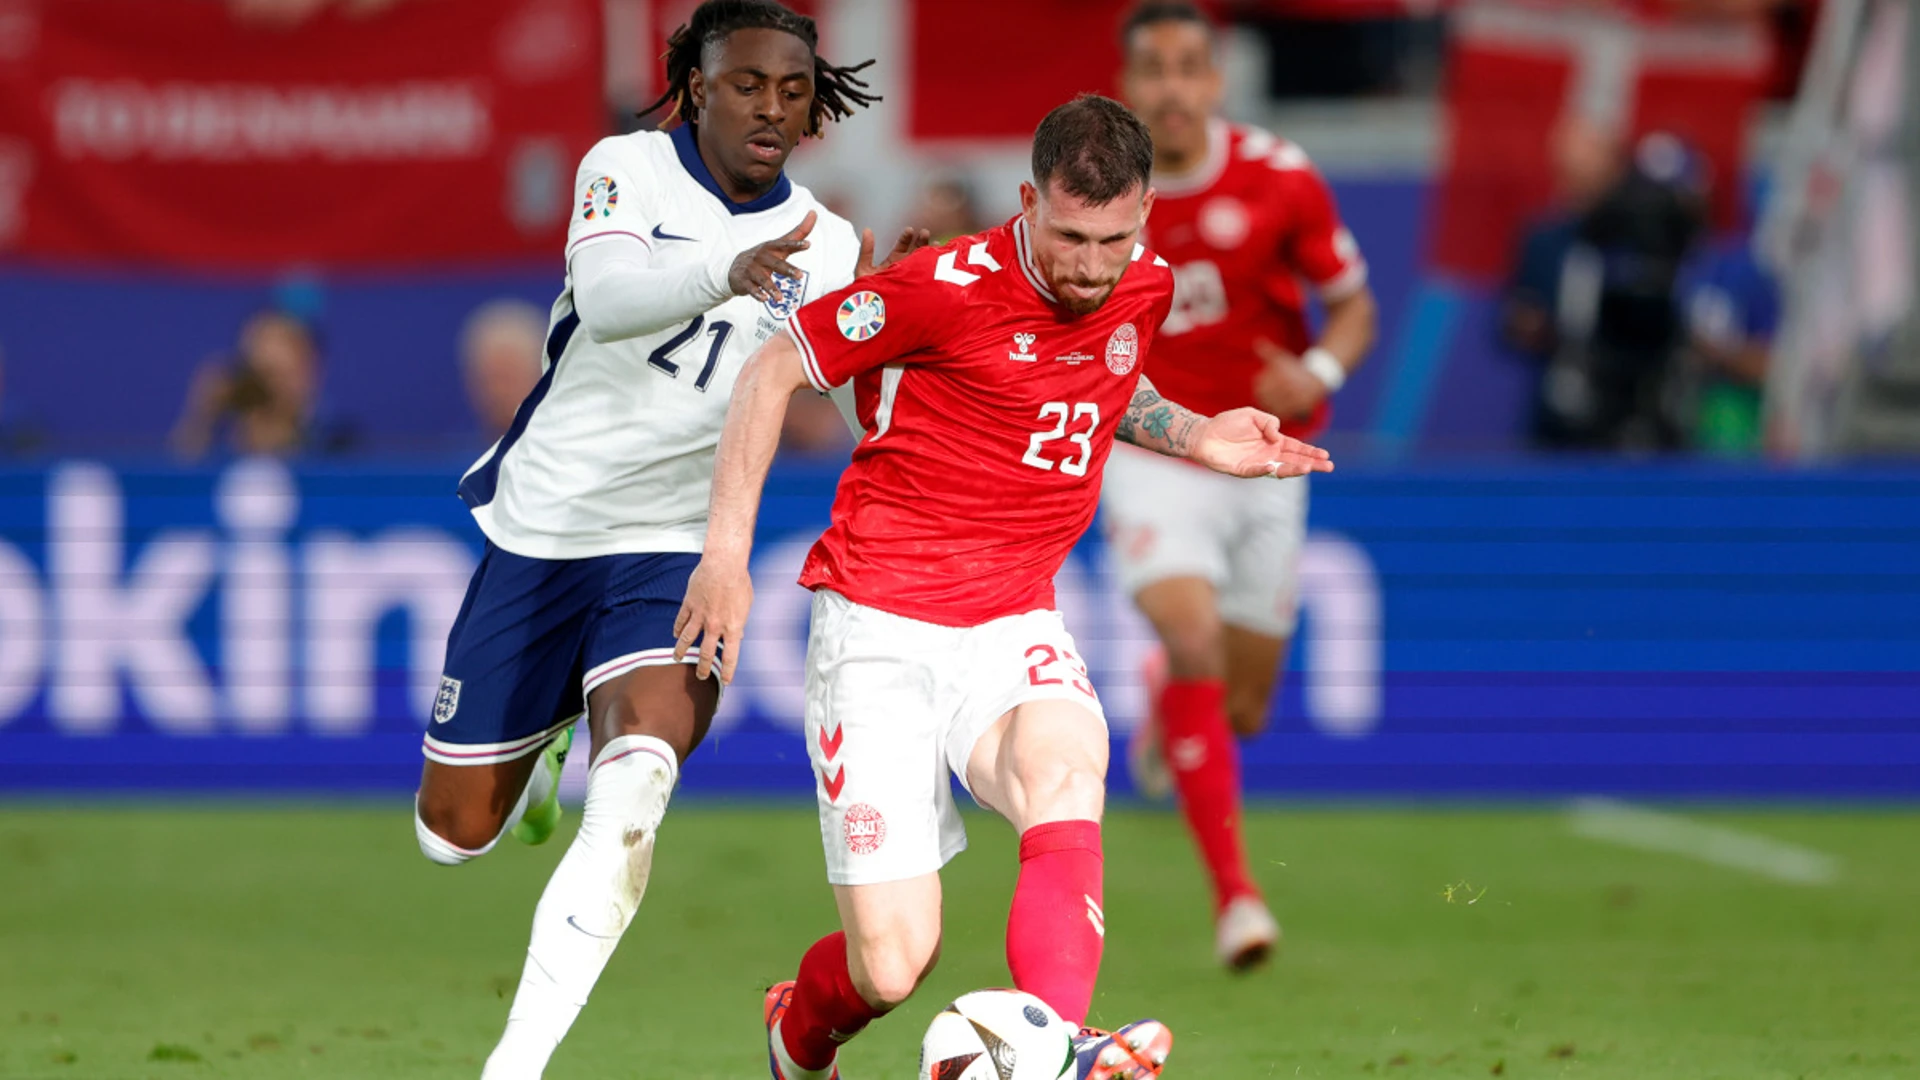 Hjulmand urges Denmark to build on England draw